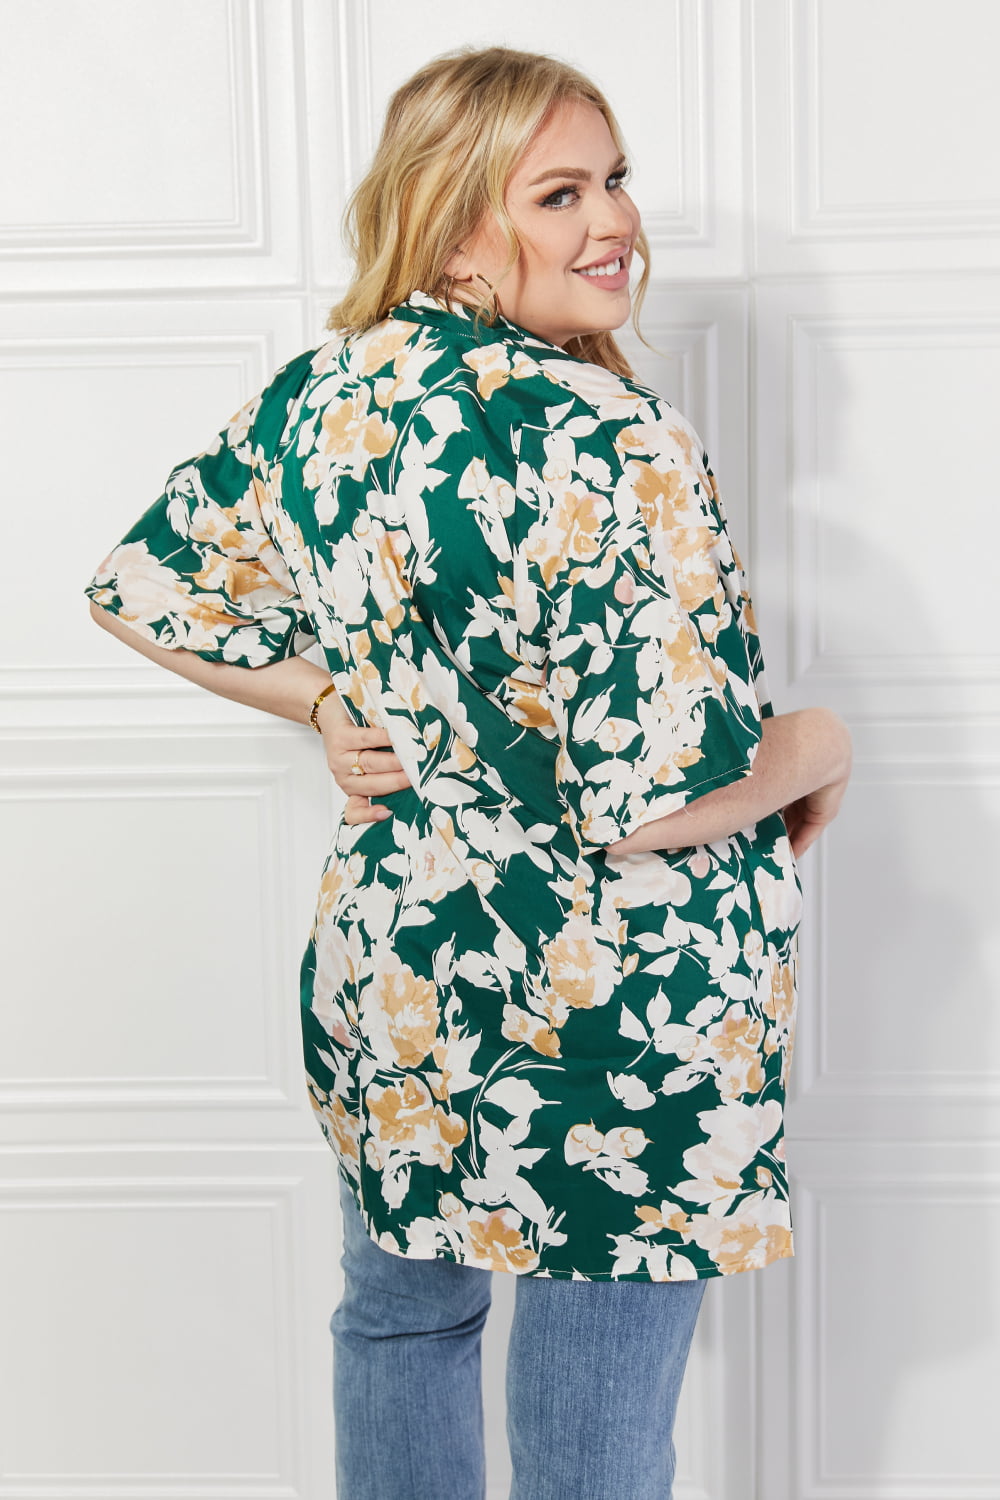 Justin Taylor Time To Grow Floral Kimono in Green